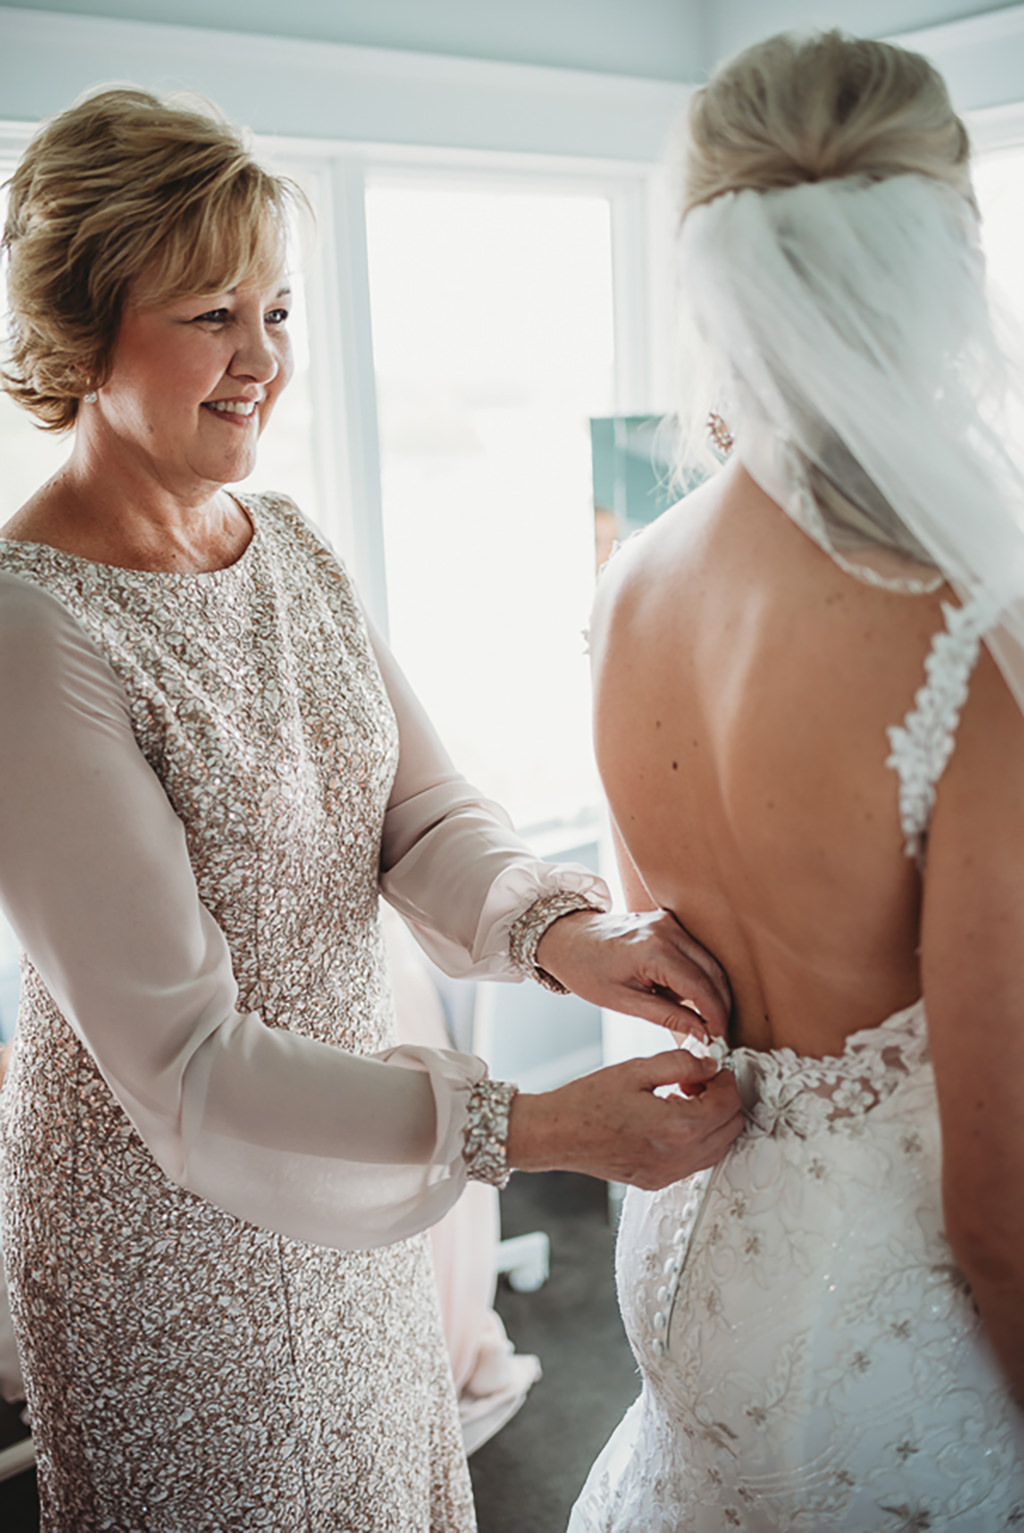 Bride and Mother Getting Ready Wedding Portrait, Bride in Low Back Floral Lace Embellished and Rhinestone Wedding Dress | Tampa Bay Wedding Dress Shop Truly Forever Bridal